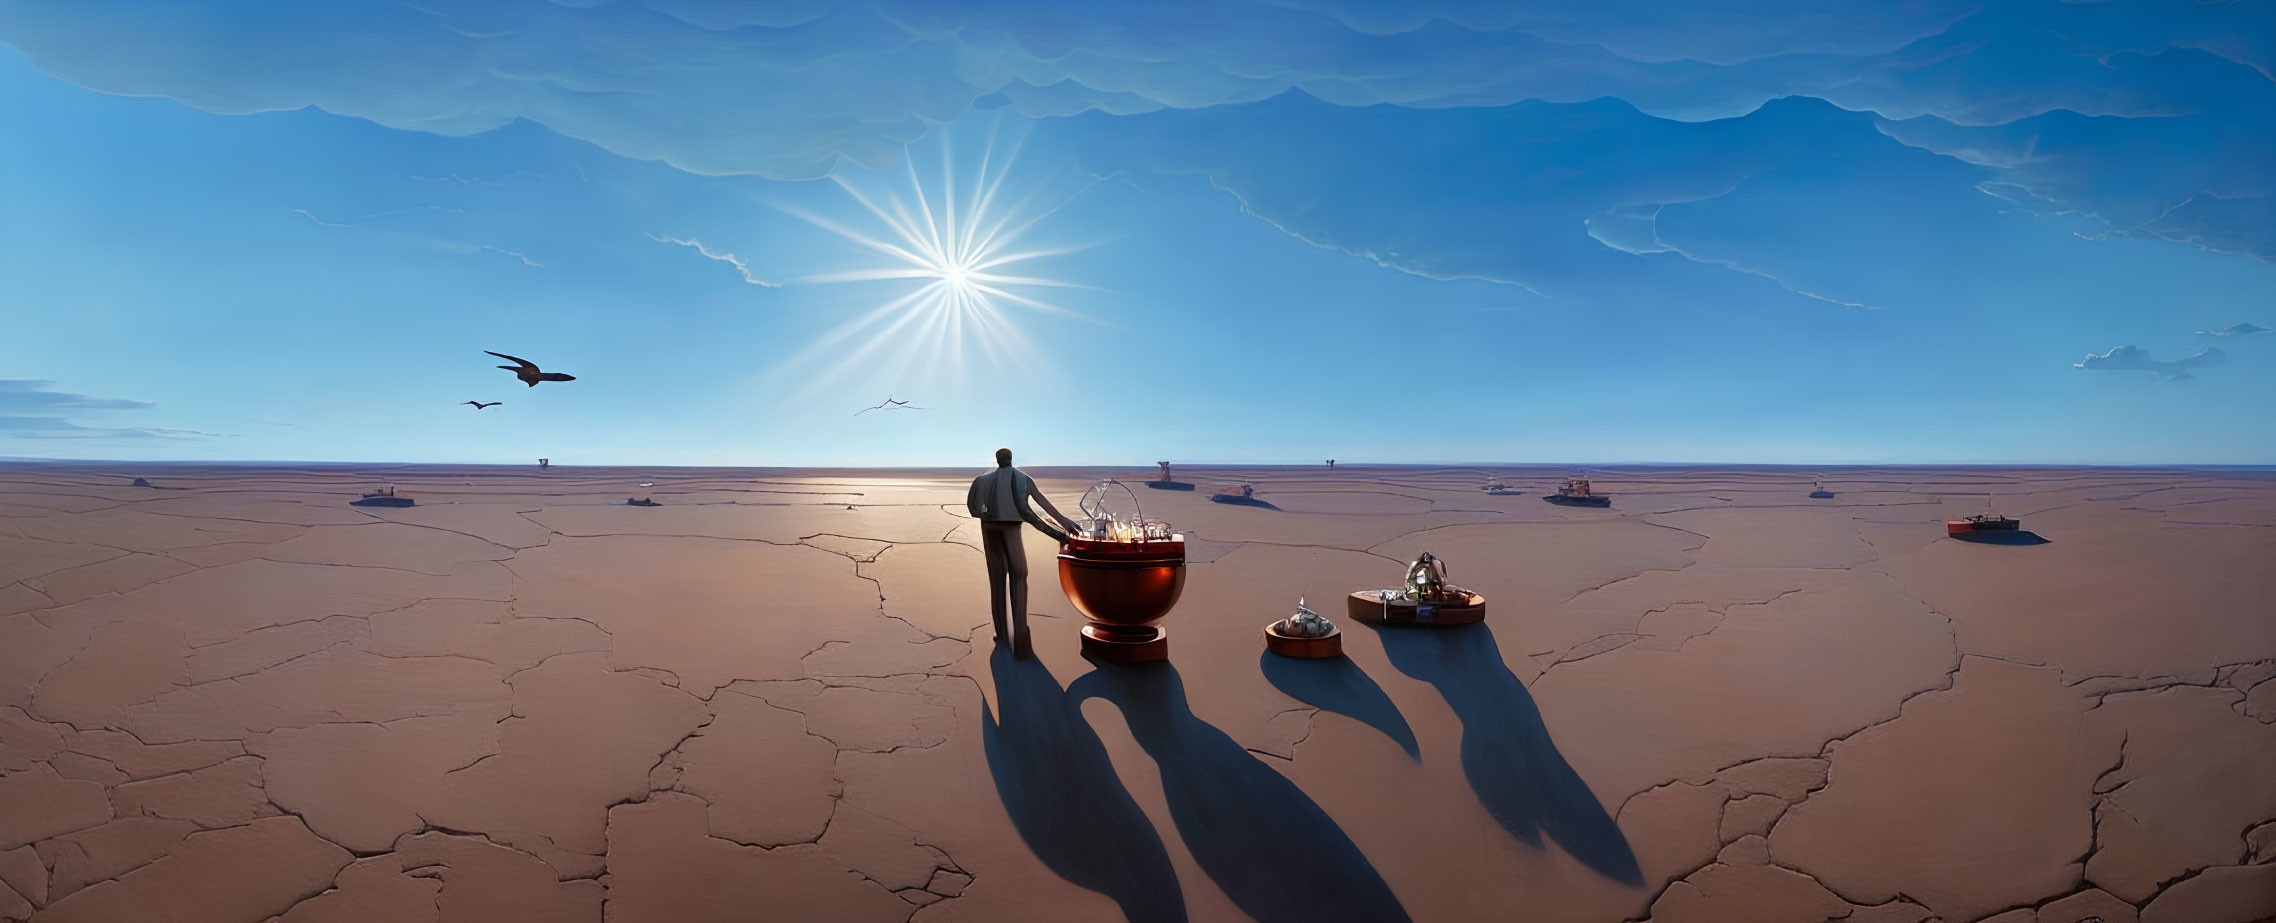 Surreal landscape with lone figure rowing boat on cracked earth